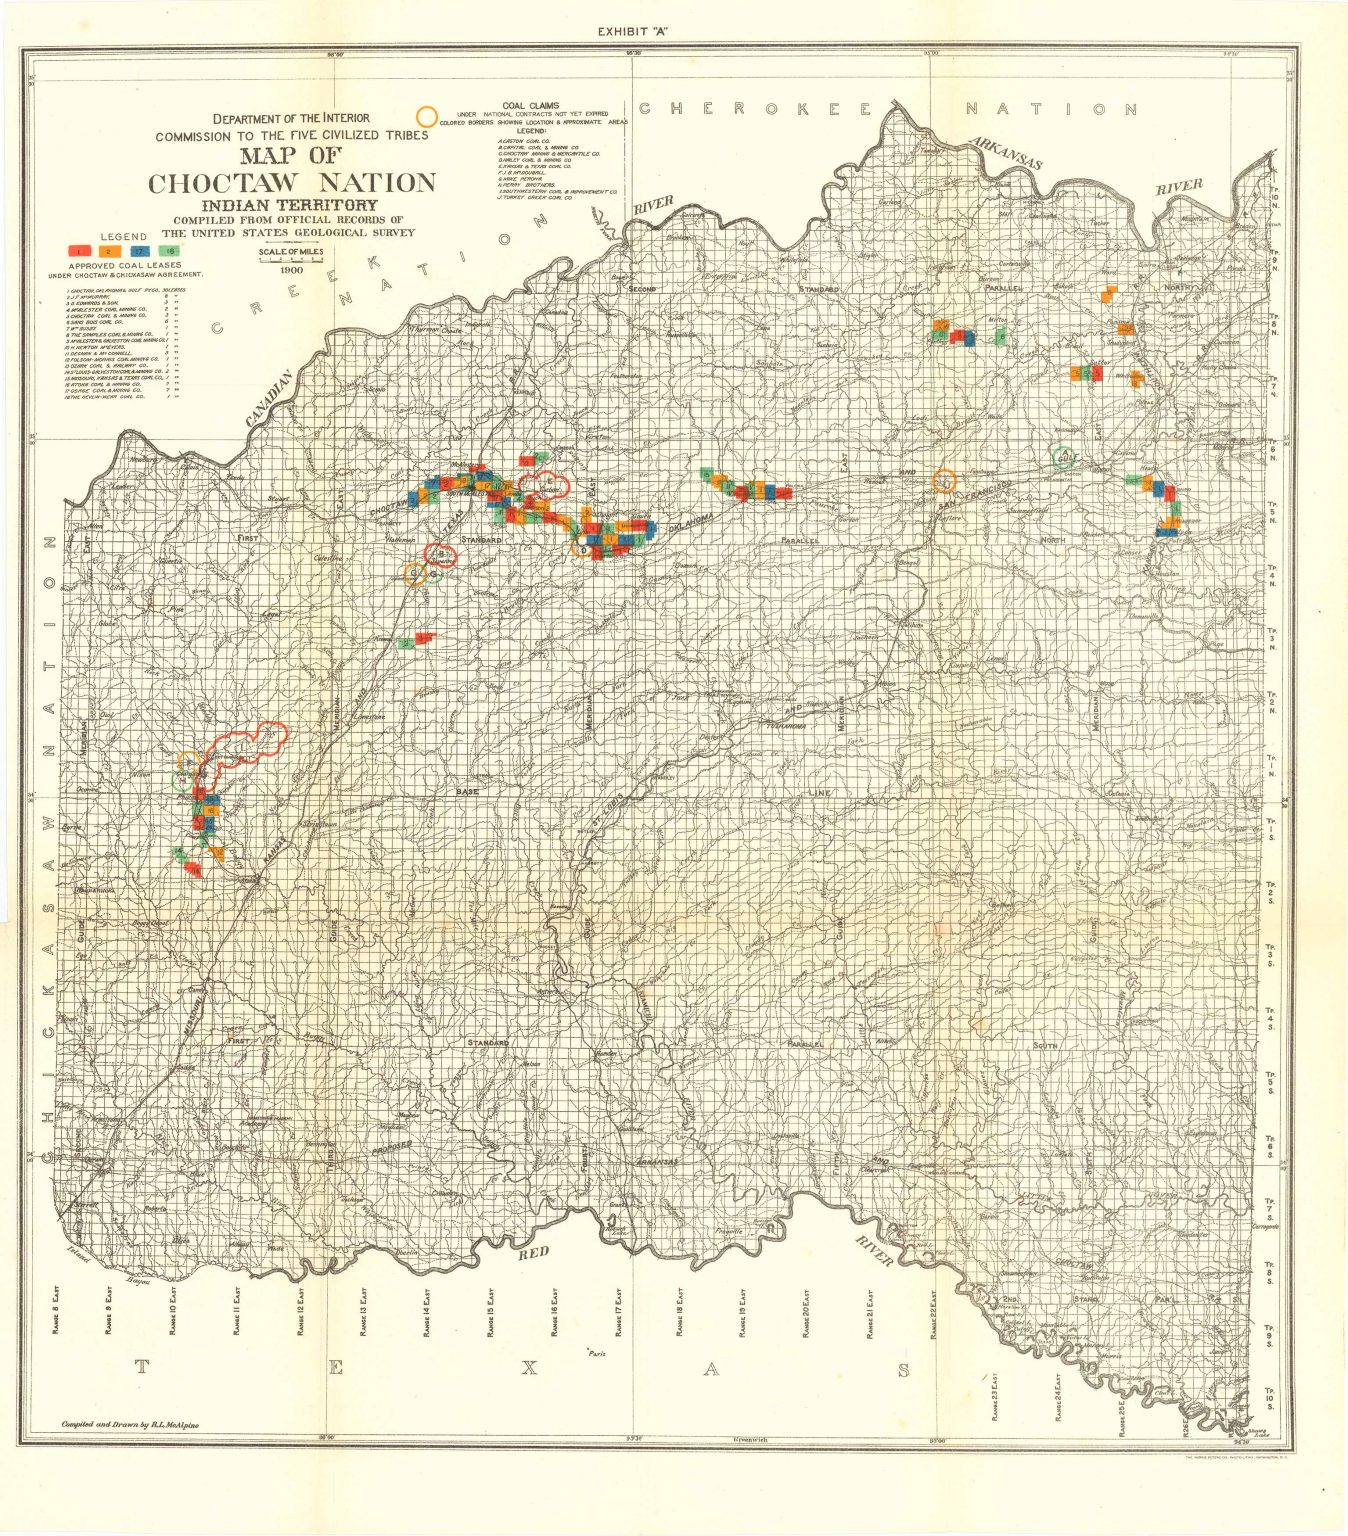 Map Of Choctaw Nation Indian Territory Compiled From Us Geological Survey 1900 Art Source 3218